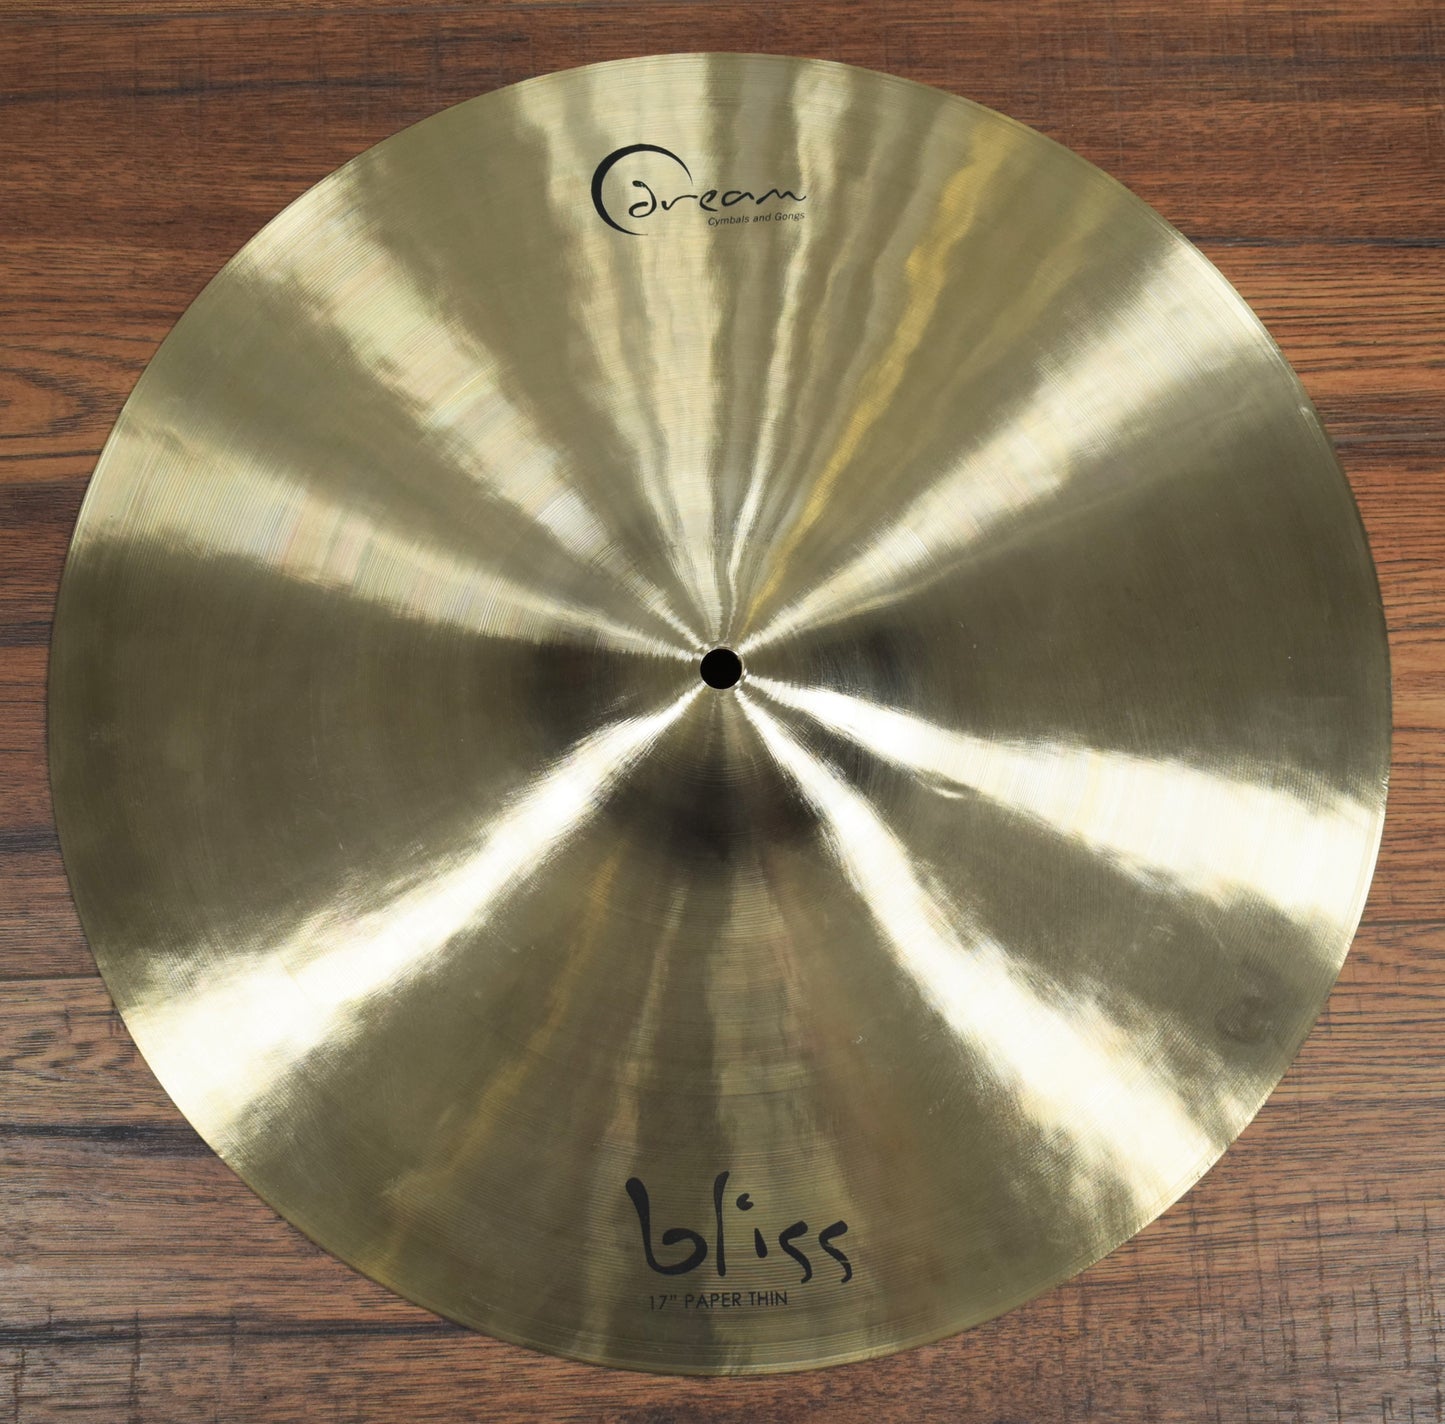 Dream Cymbals BPT17 Bliss Hand Forged & Hammered 17" Paper Thin Crash Demo